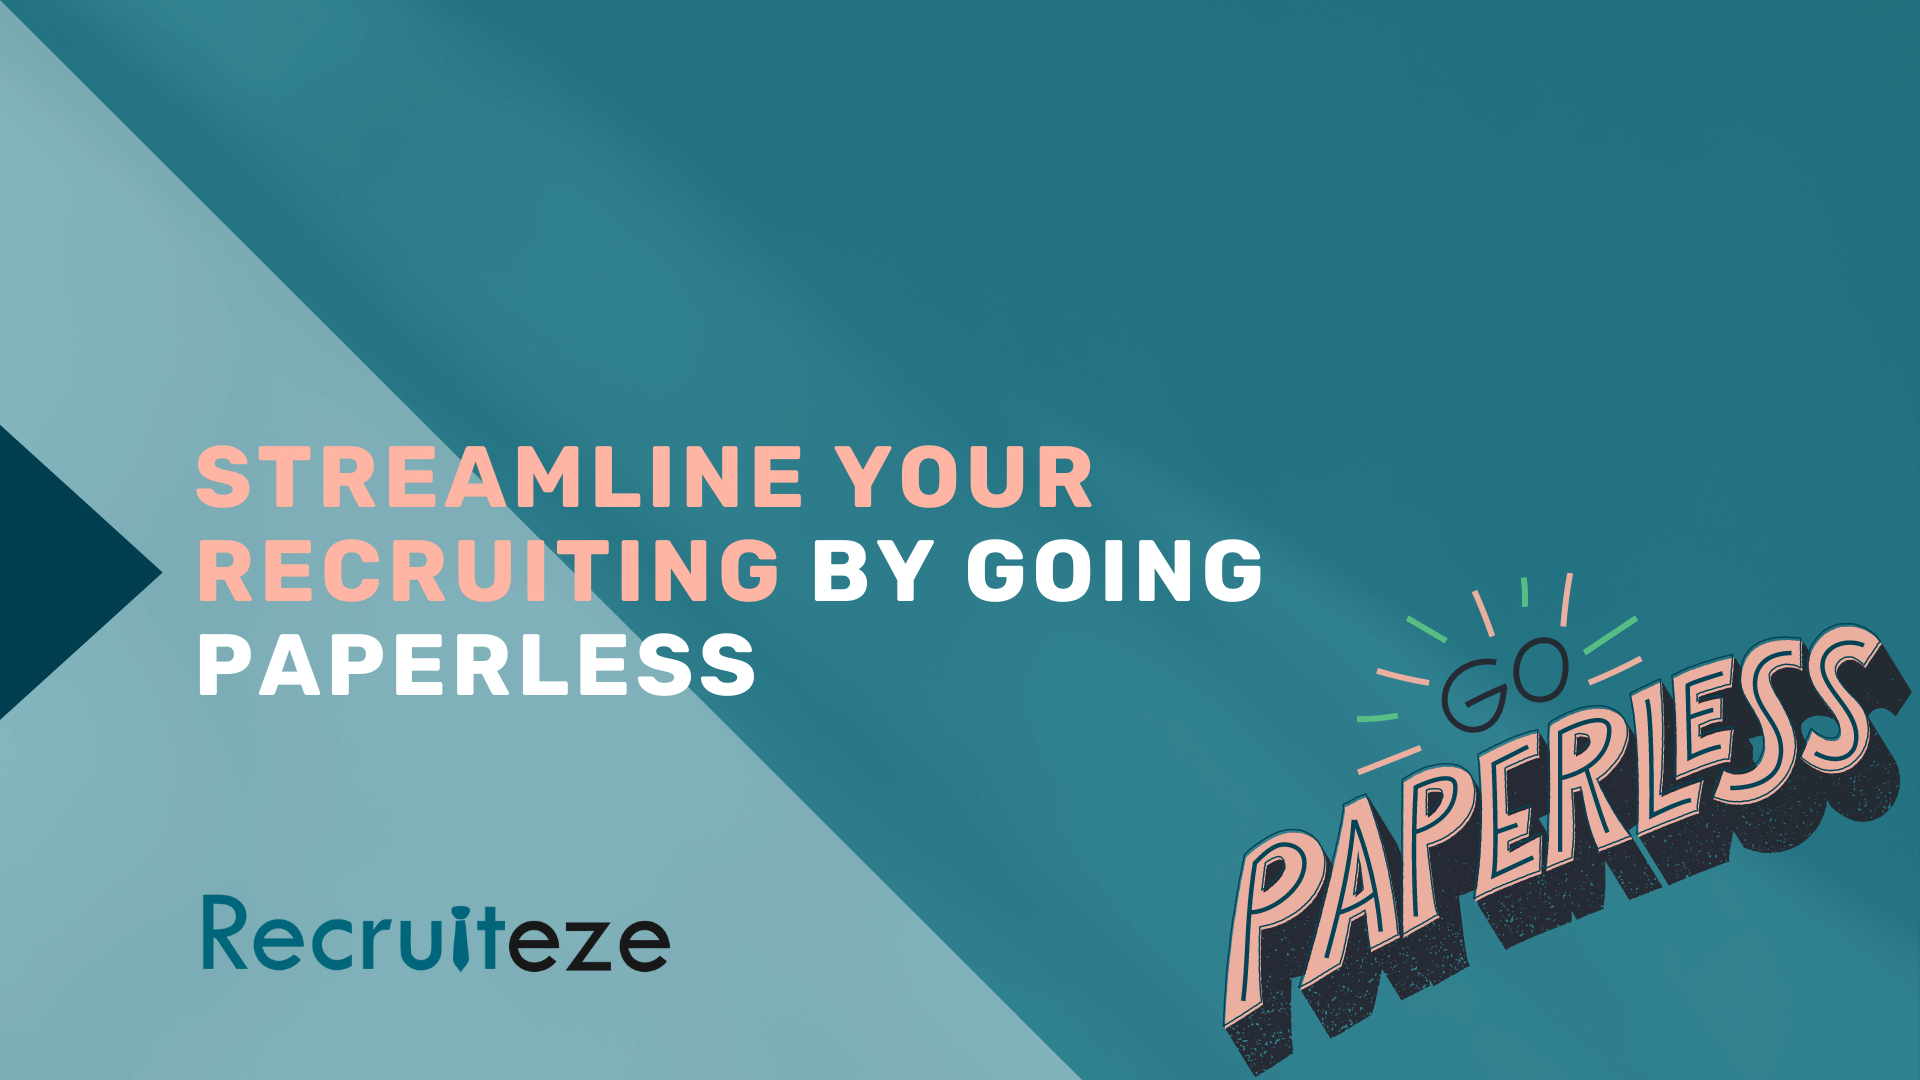 Streamline Your Recruiting by Going Paperless